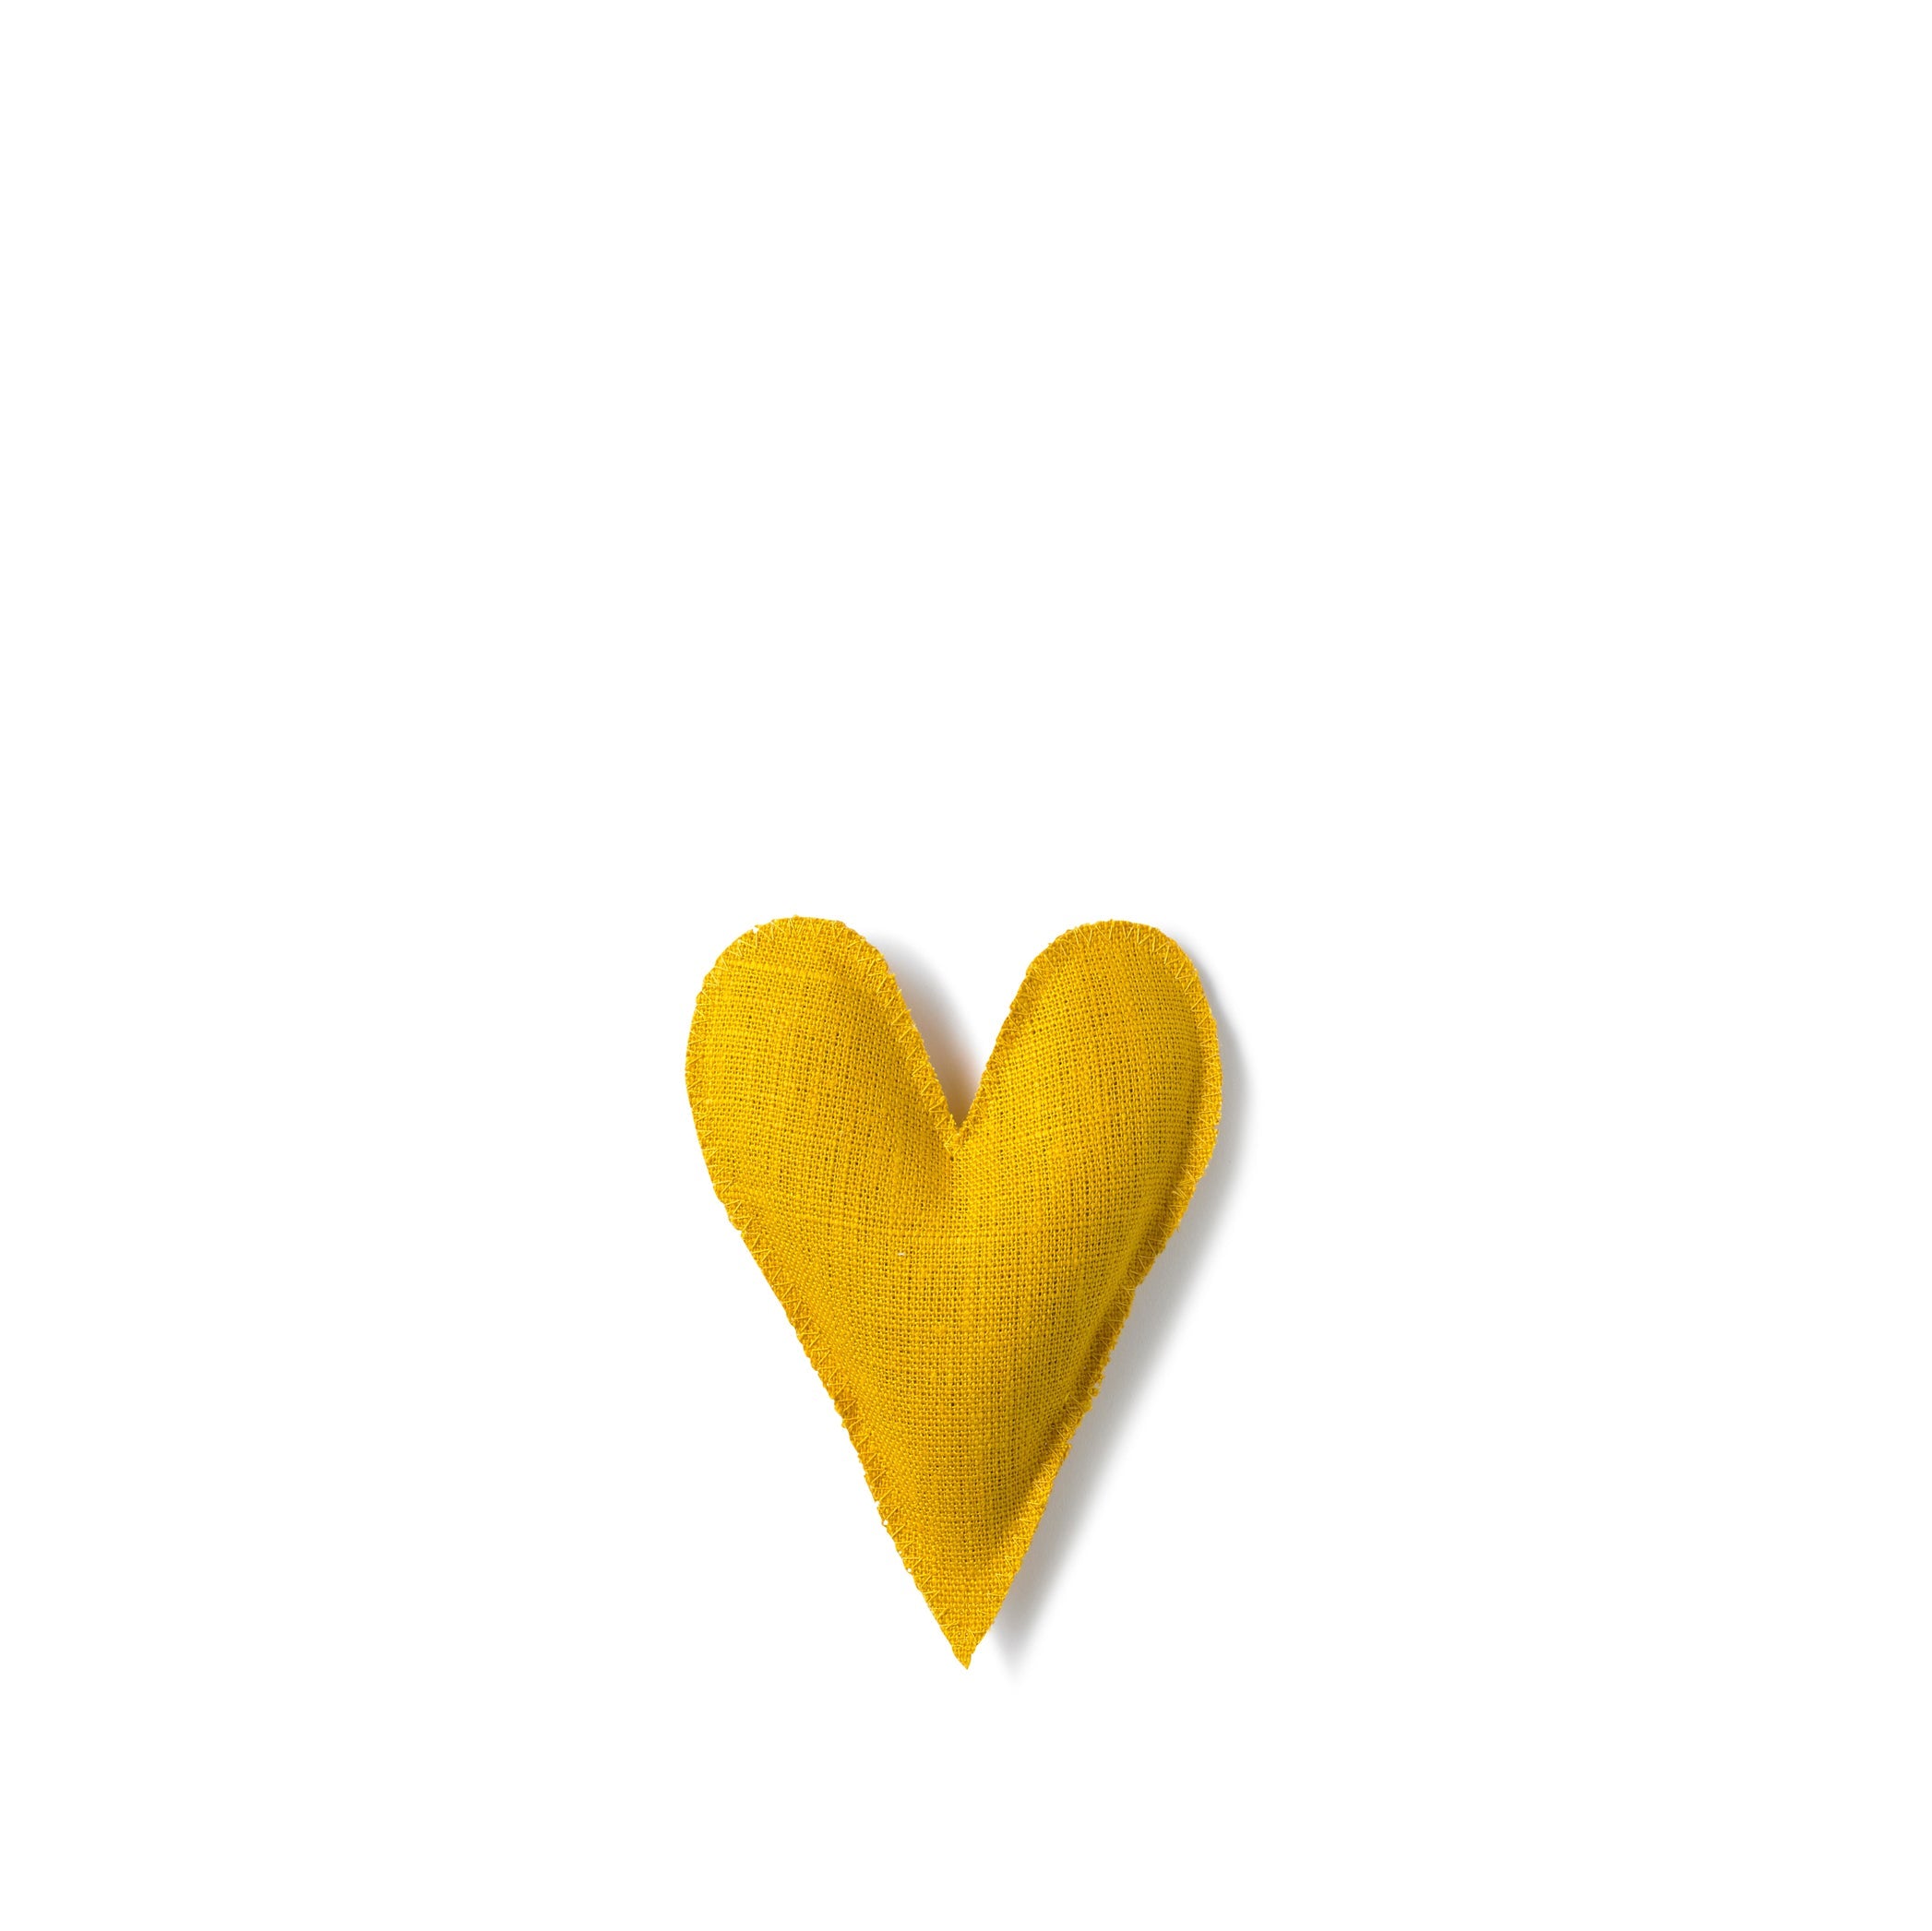 Lavender Heart in Yellow